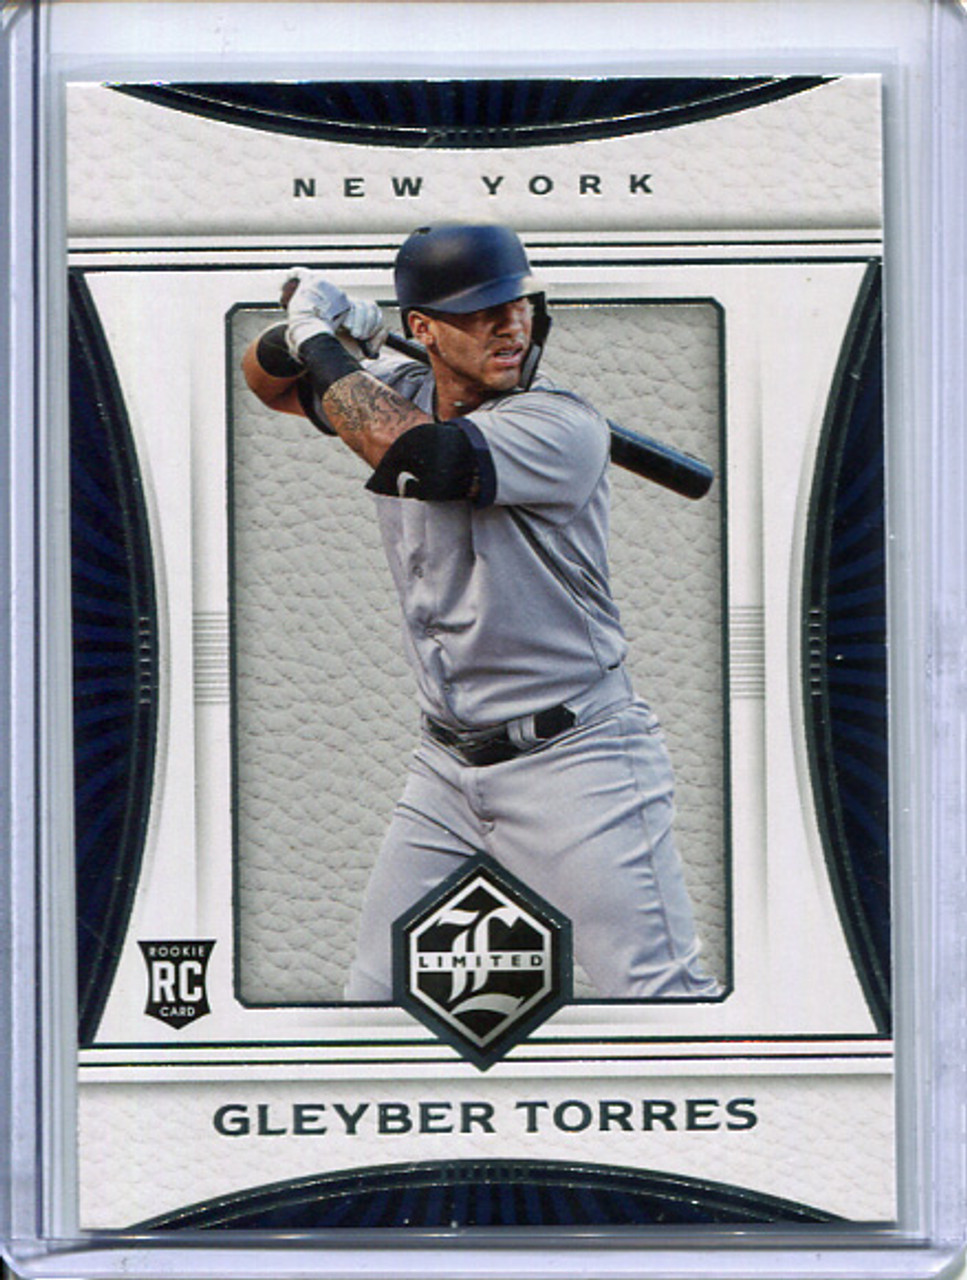 Gleyber Torres 2018 Chronicles, Limited #12